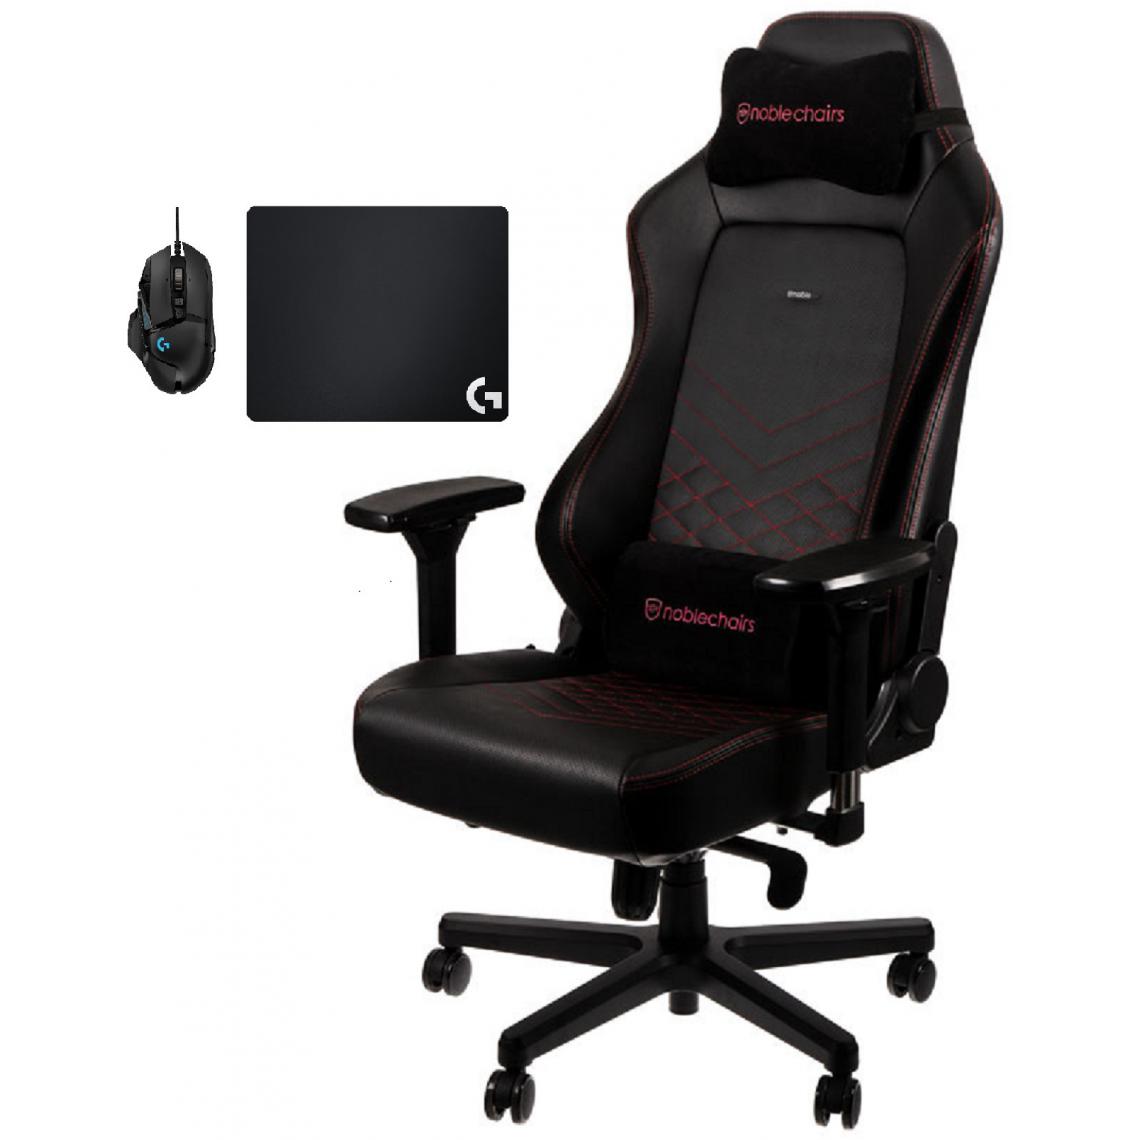 Noblechairs - Chaise Gamer HERO - Noir/Rouge + Souris G502 HERO + Tapis de souris G240 - Chaise gamer